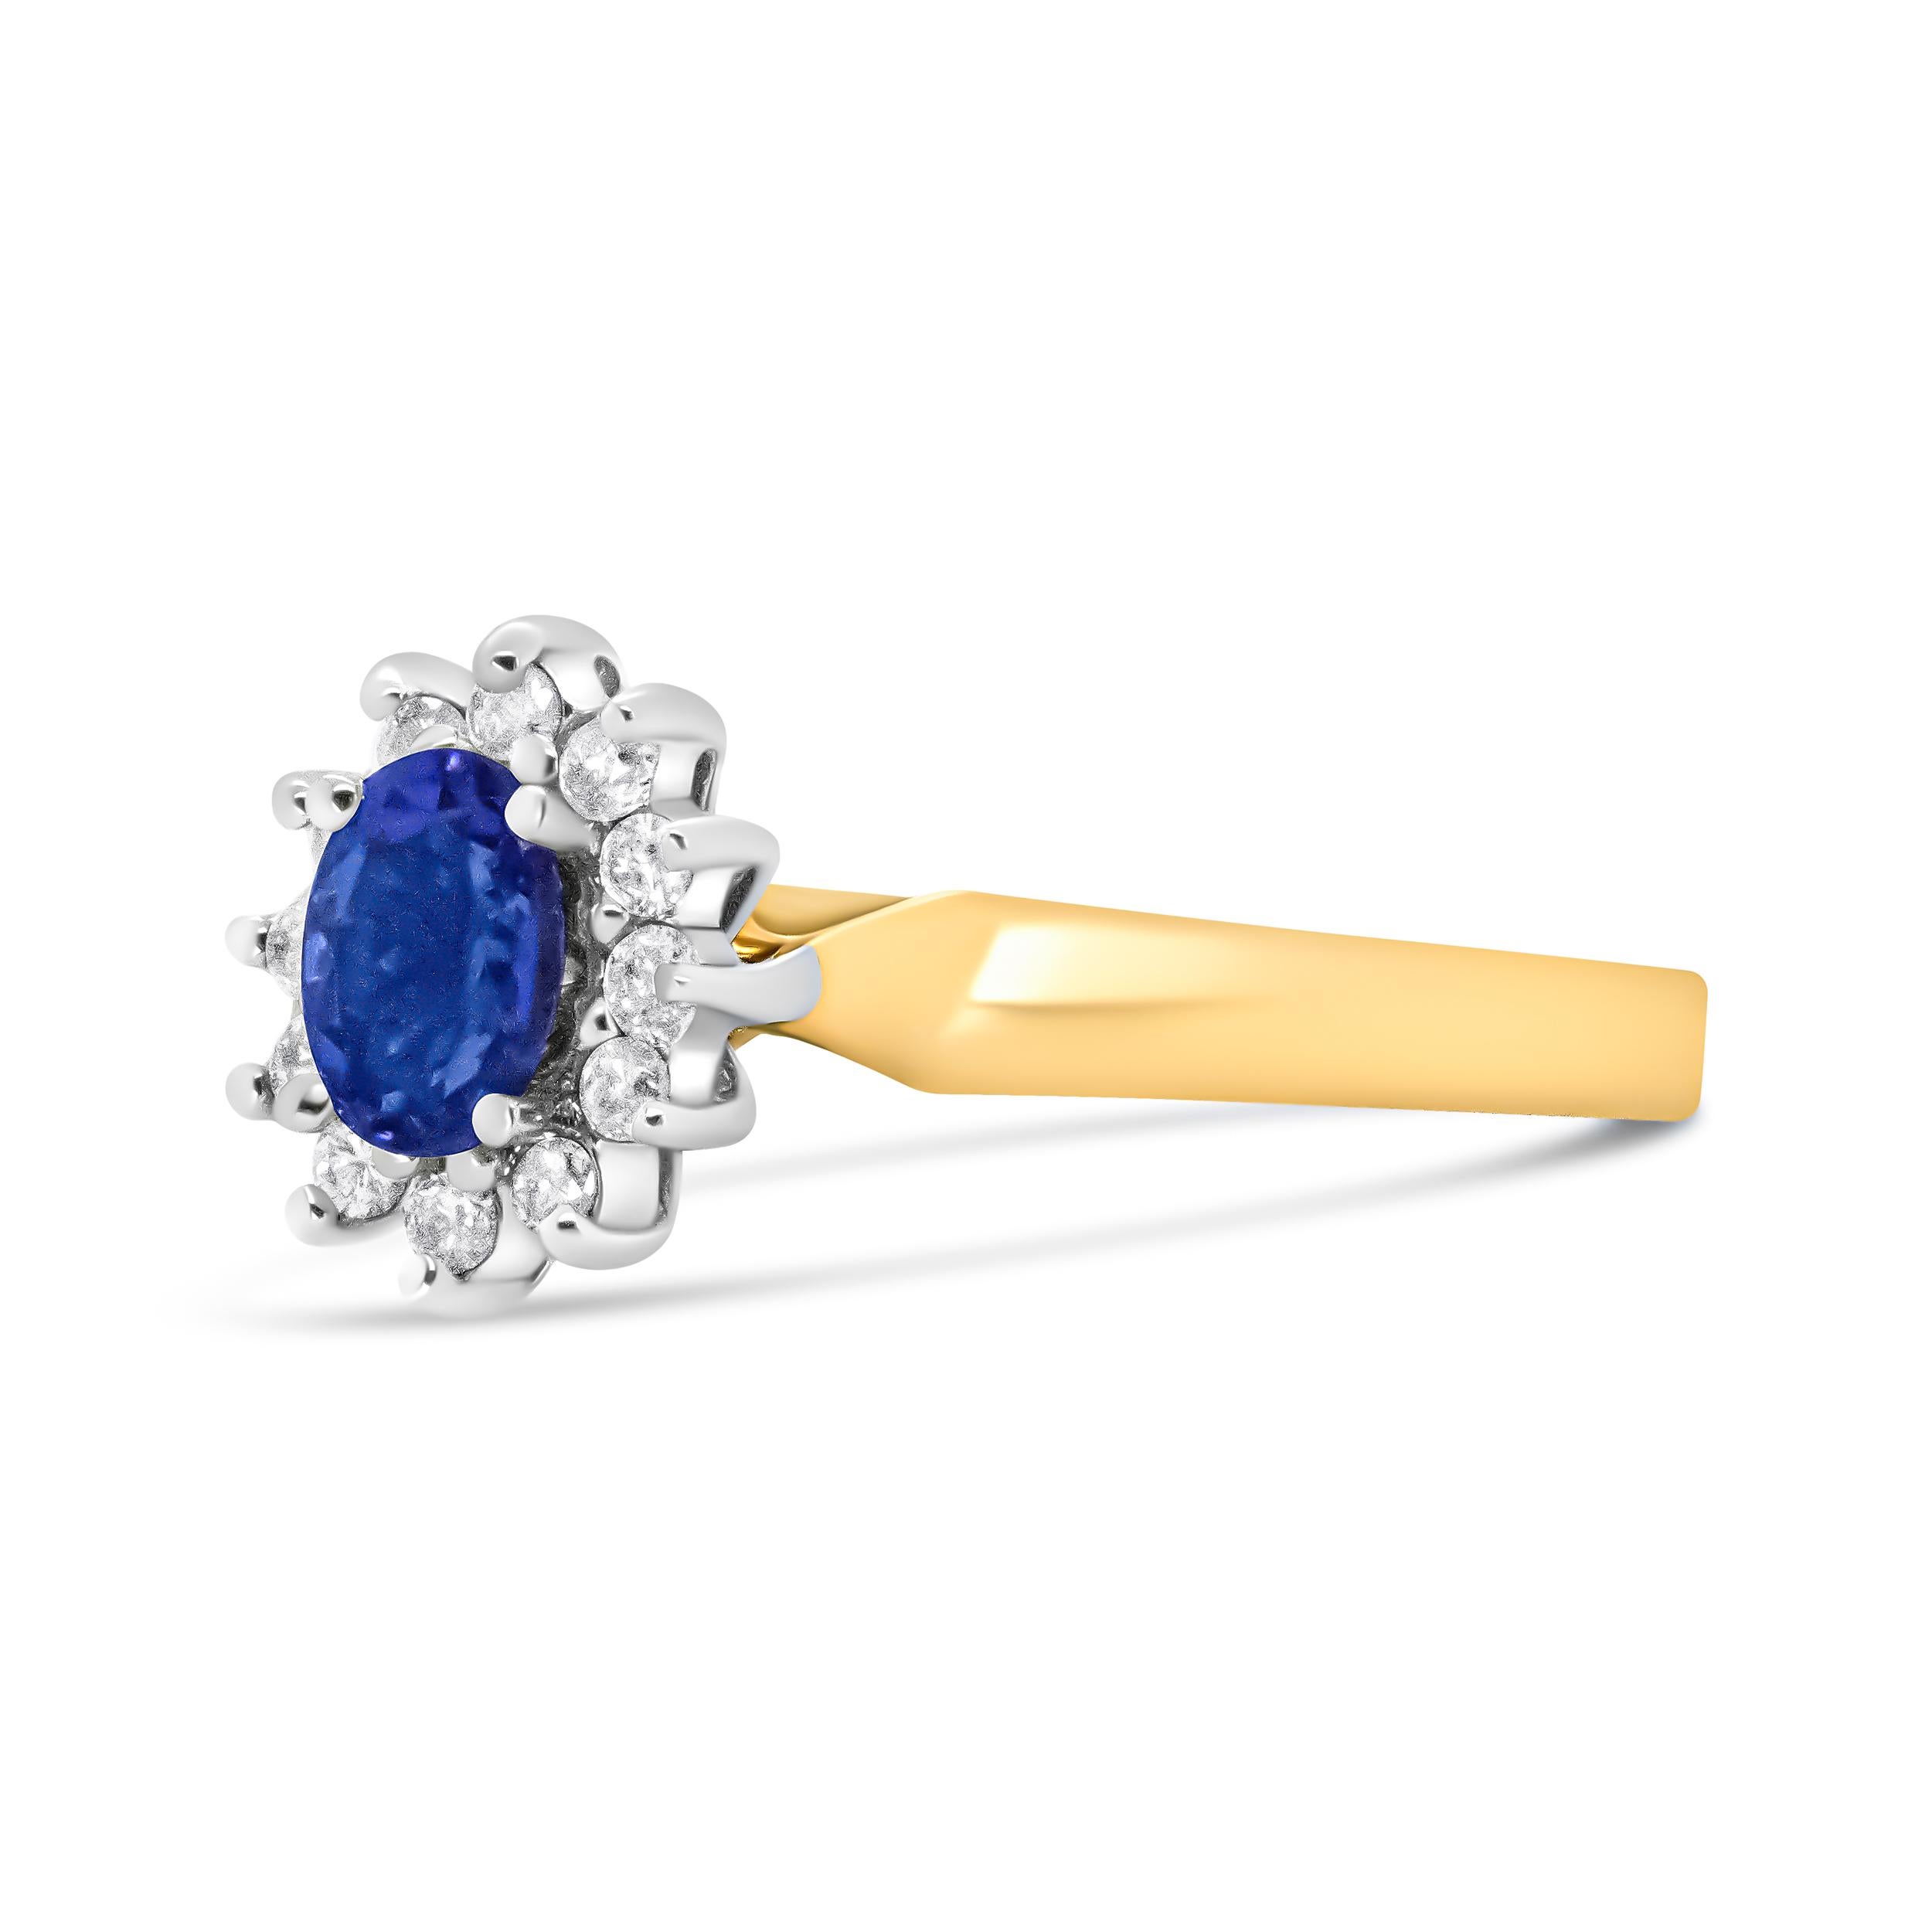 Contemporary 14K Yellow Gold 1/5 Carat Round Diamond and 6x4mm Oval Blue Tanzanite Halo Ring For Sale